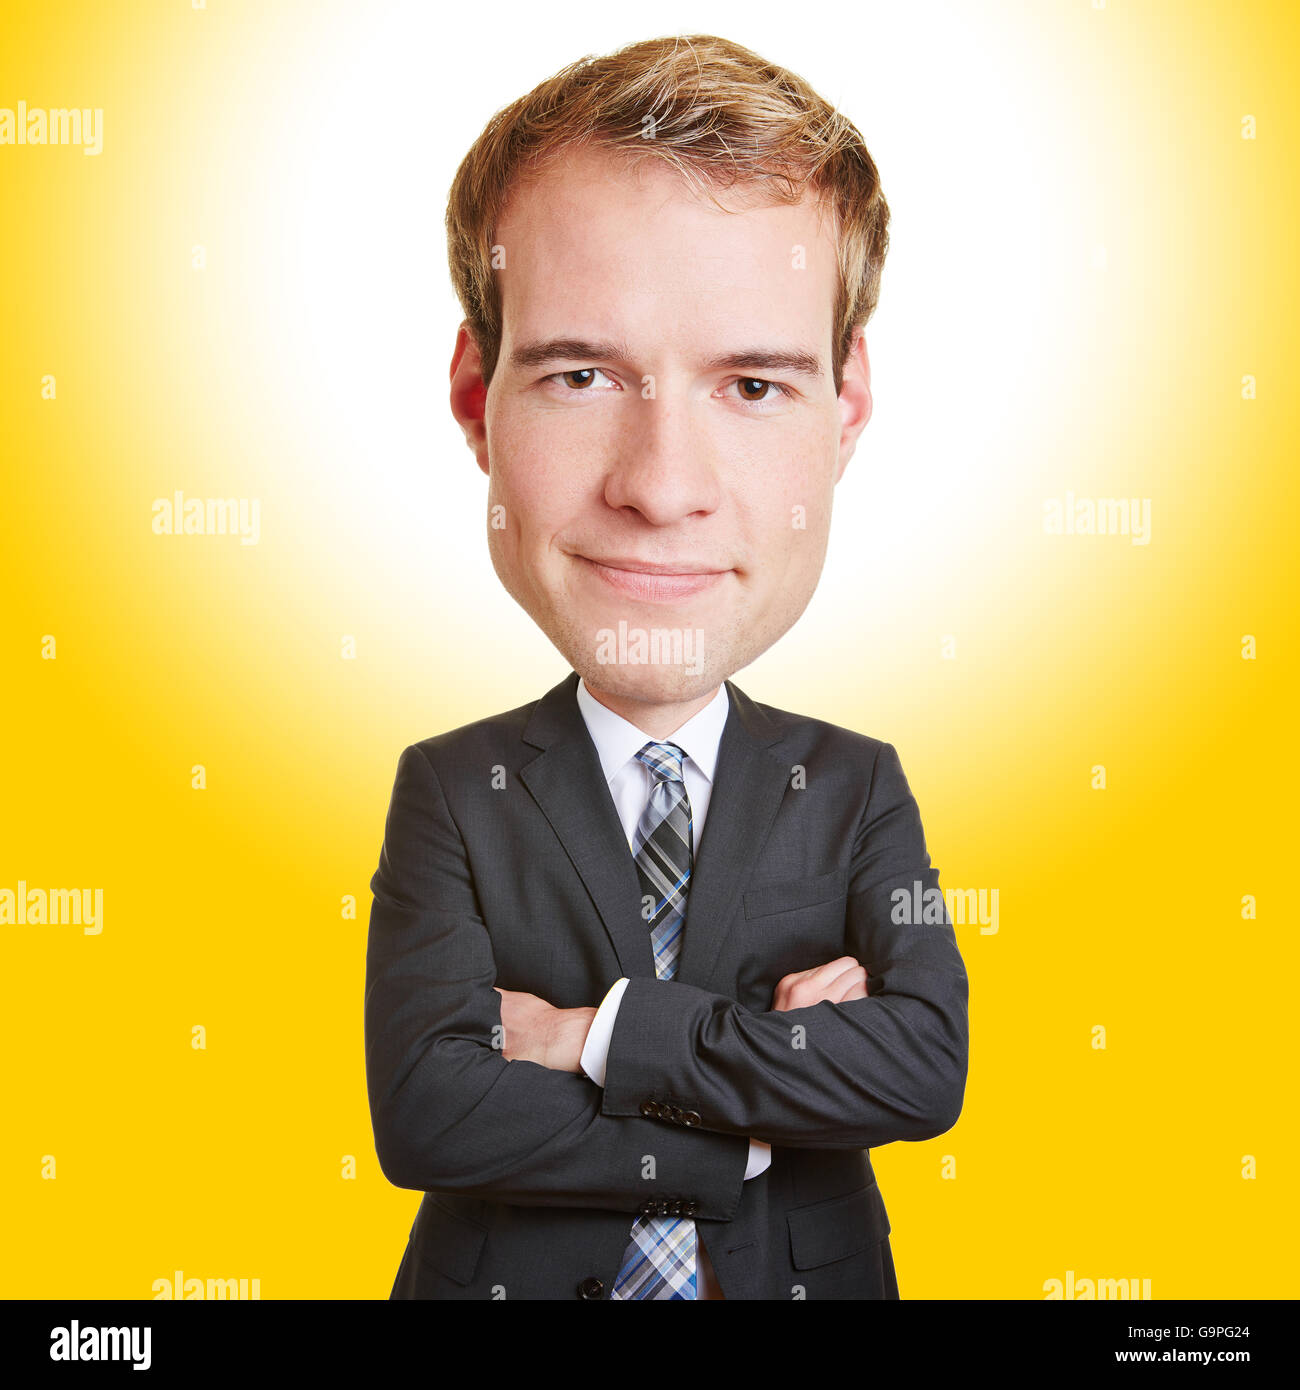 Funny smiling business man with a big head in front of a yellow background Stock Photo